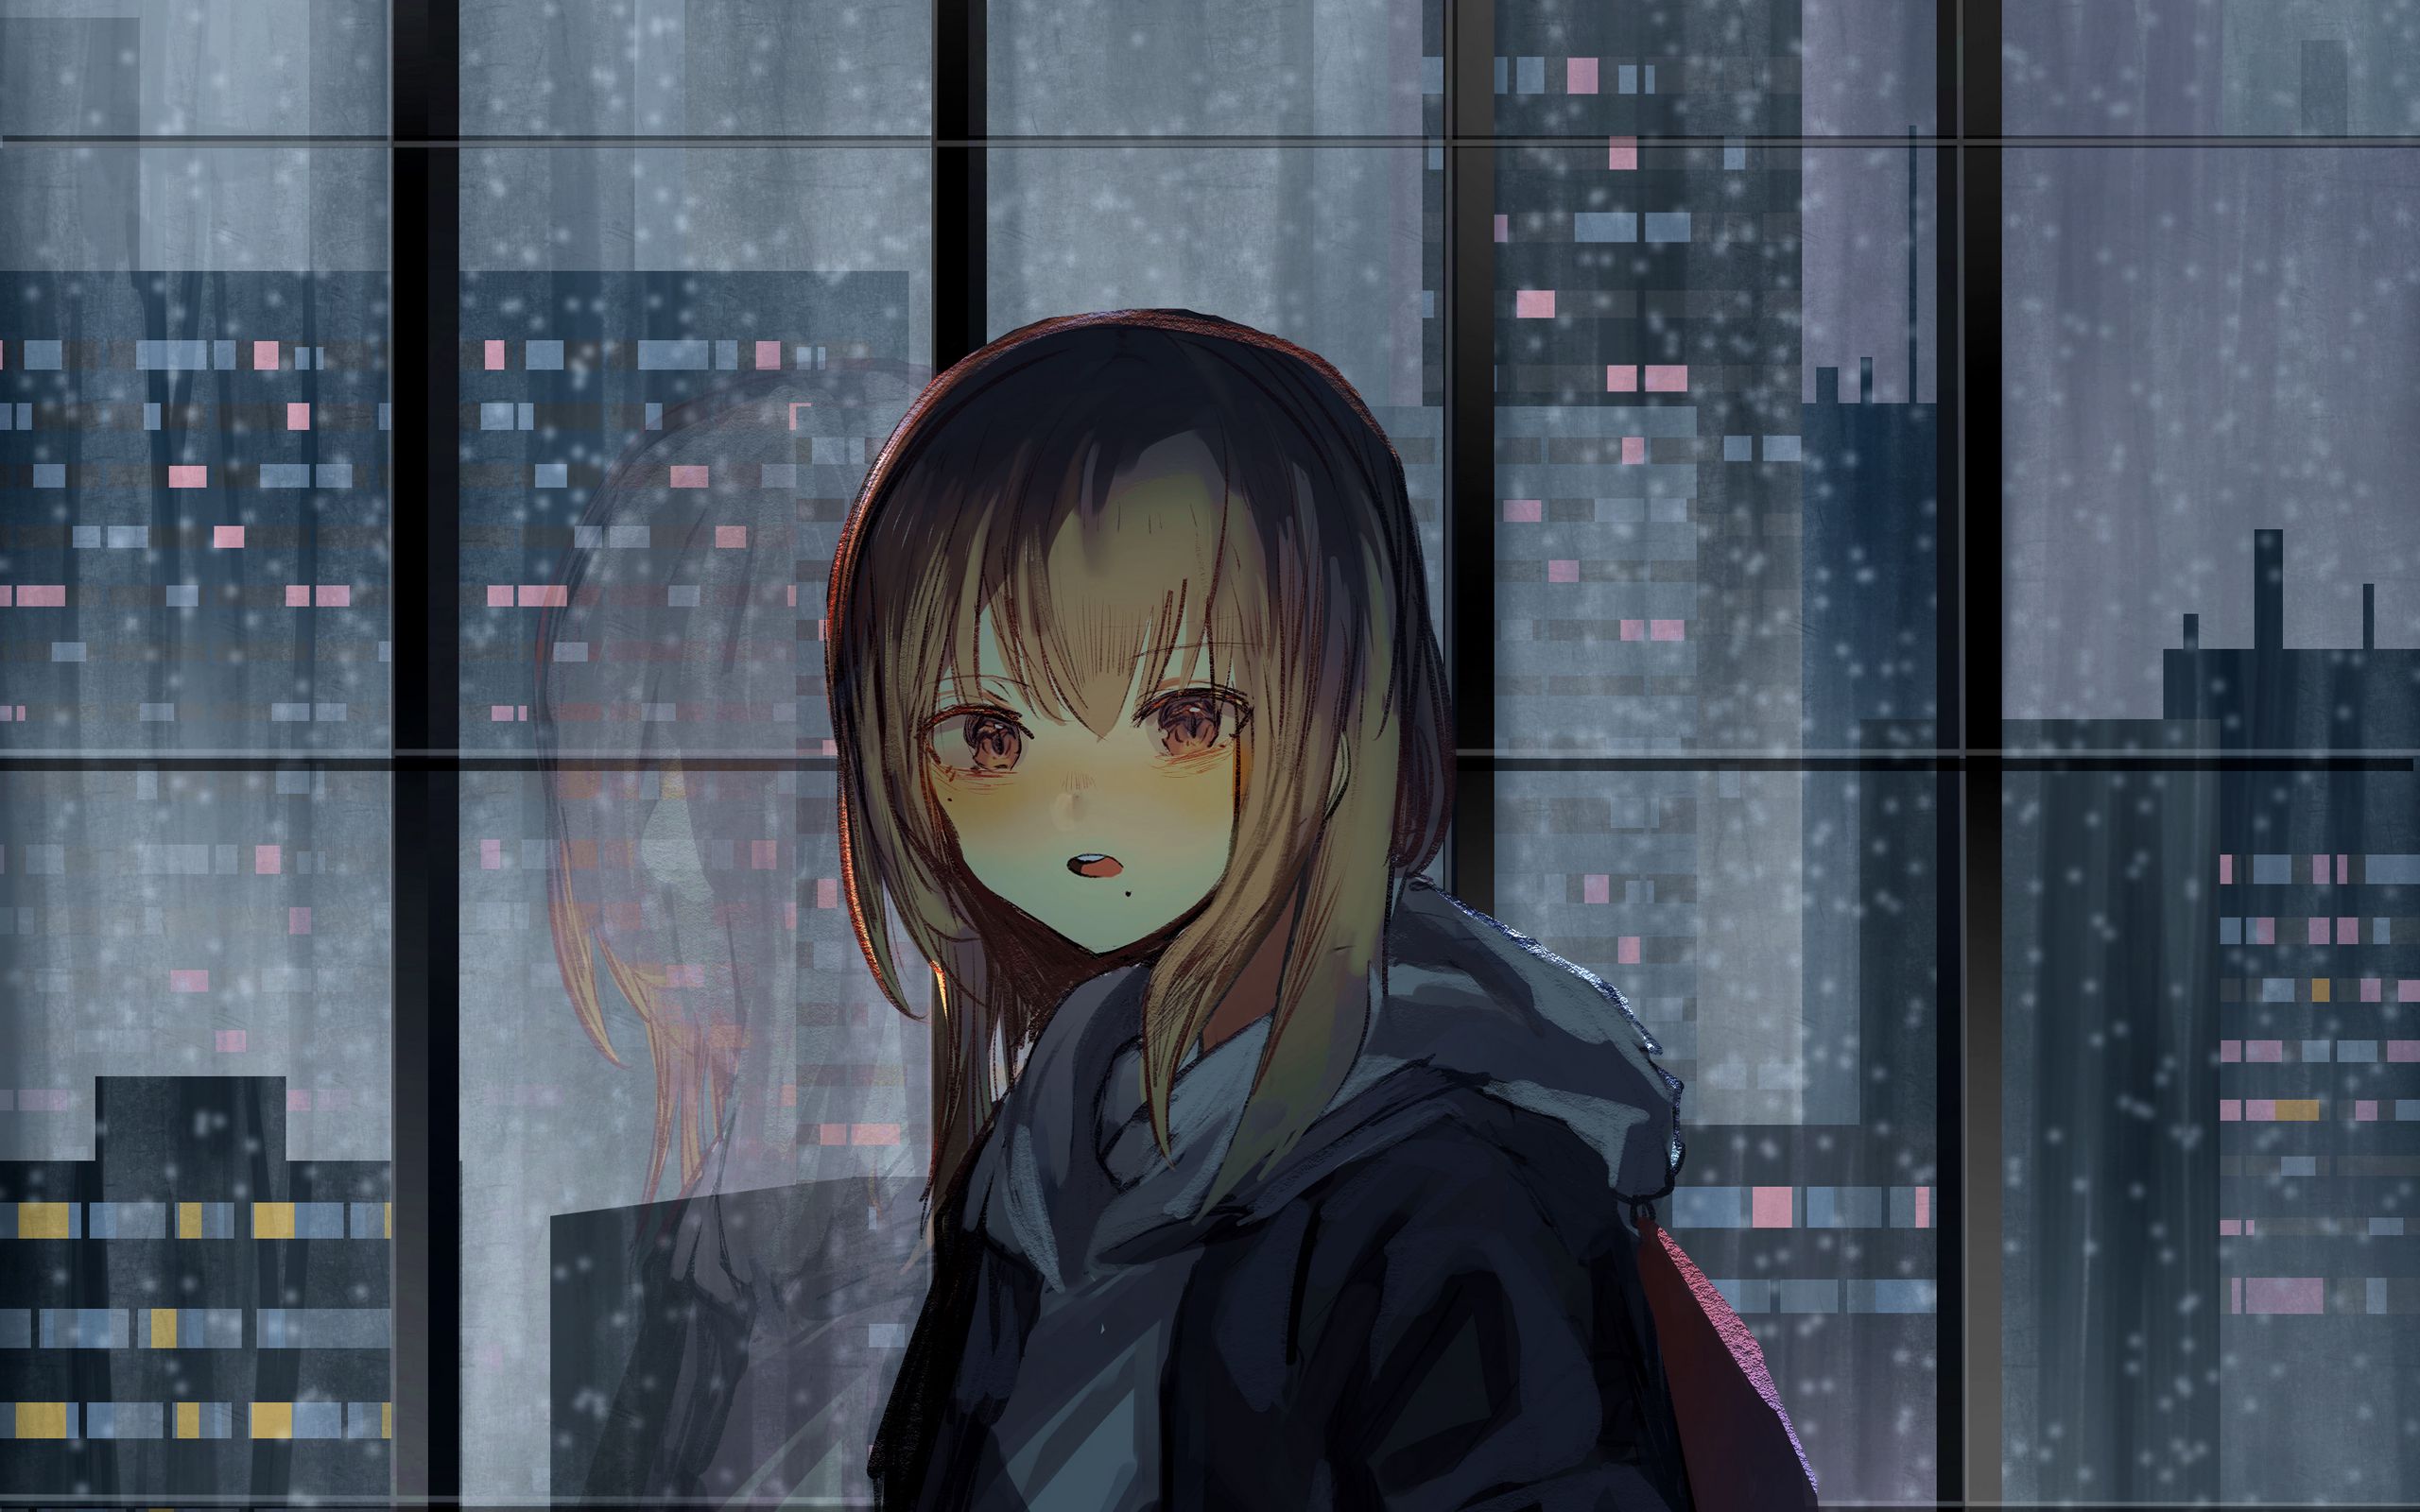 Download wallpaper 2560x1600 girl, window, buildings, city, view, anime ...